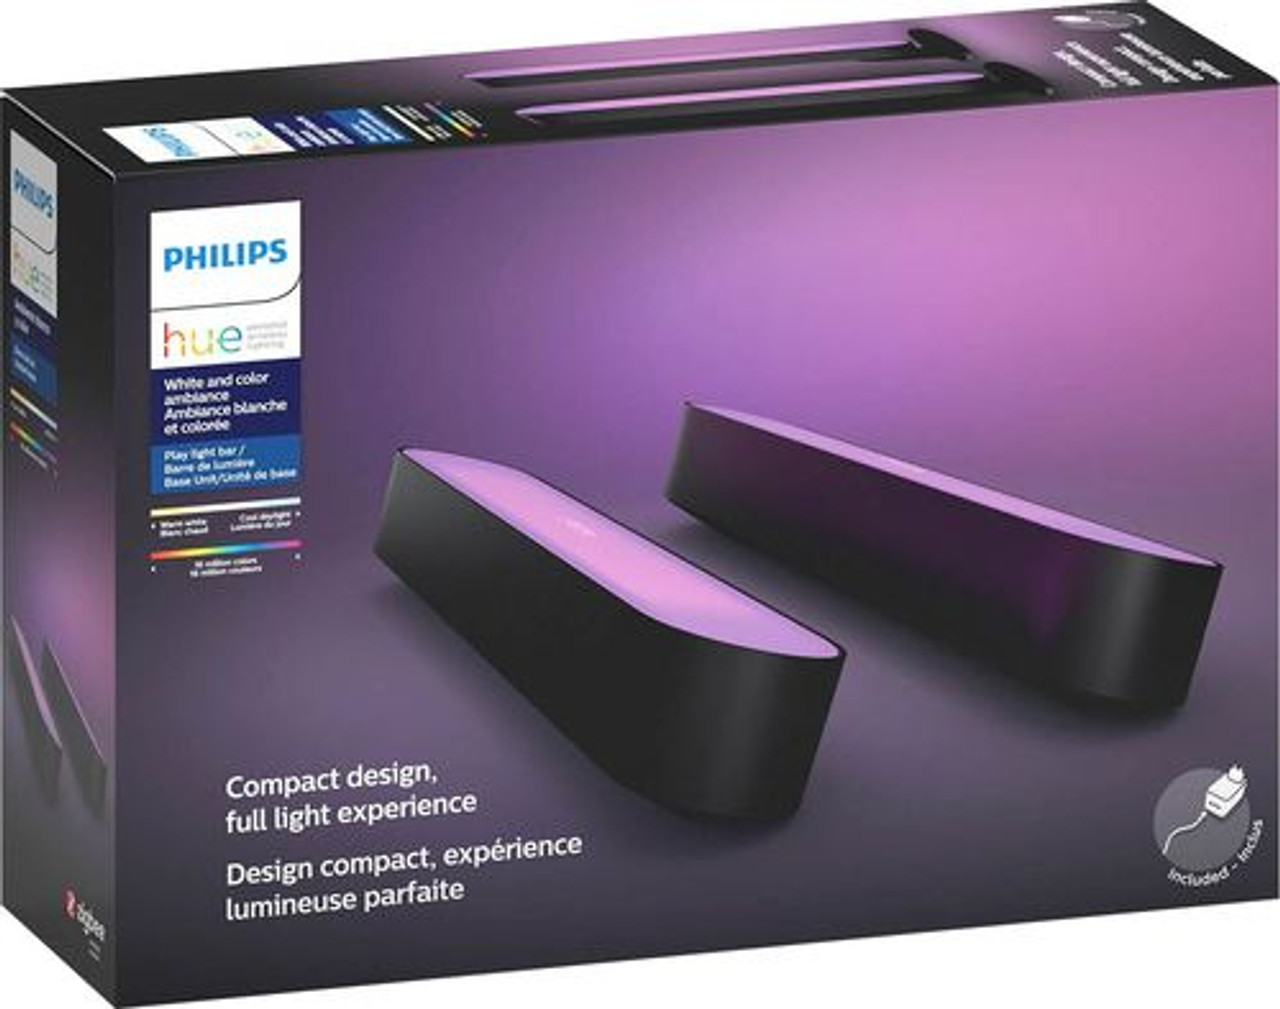 Philips - Hue Play White & Color Ambiance Smart LED Bar Light (2-Pack) - Multicolor